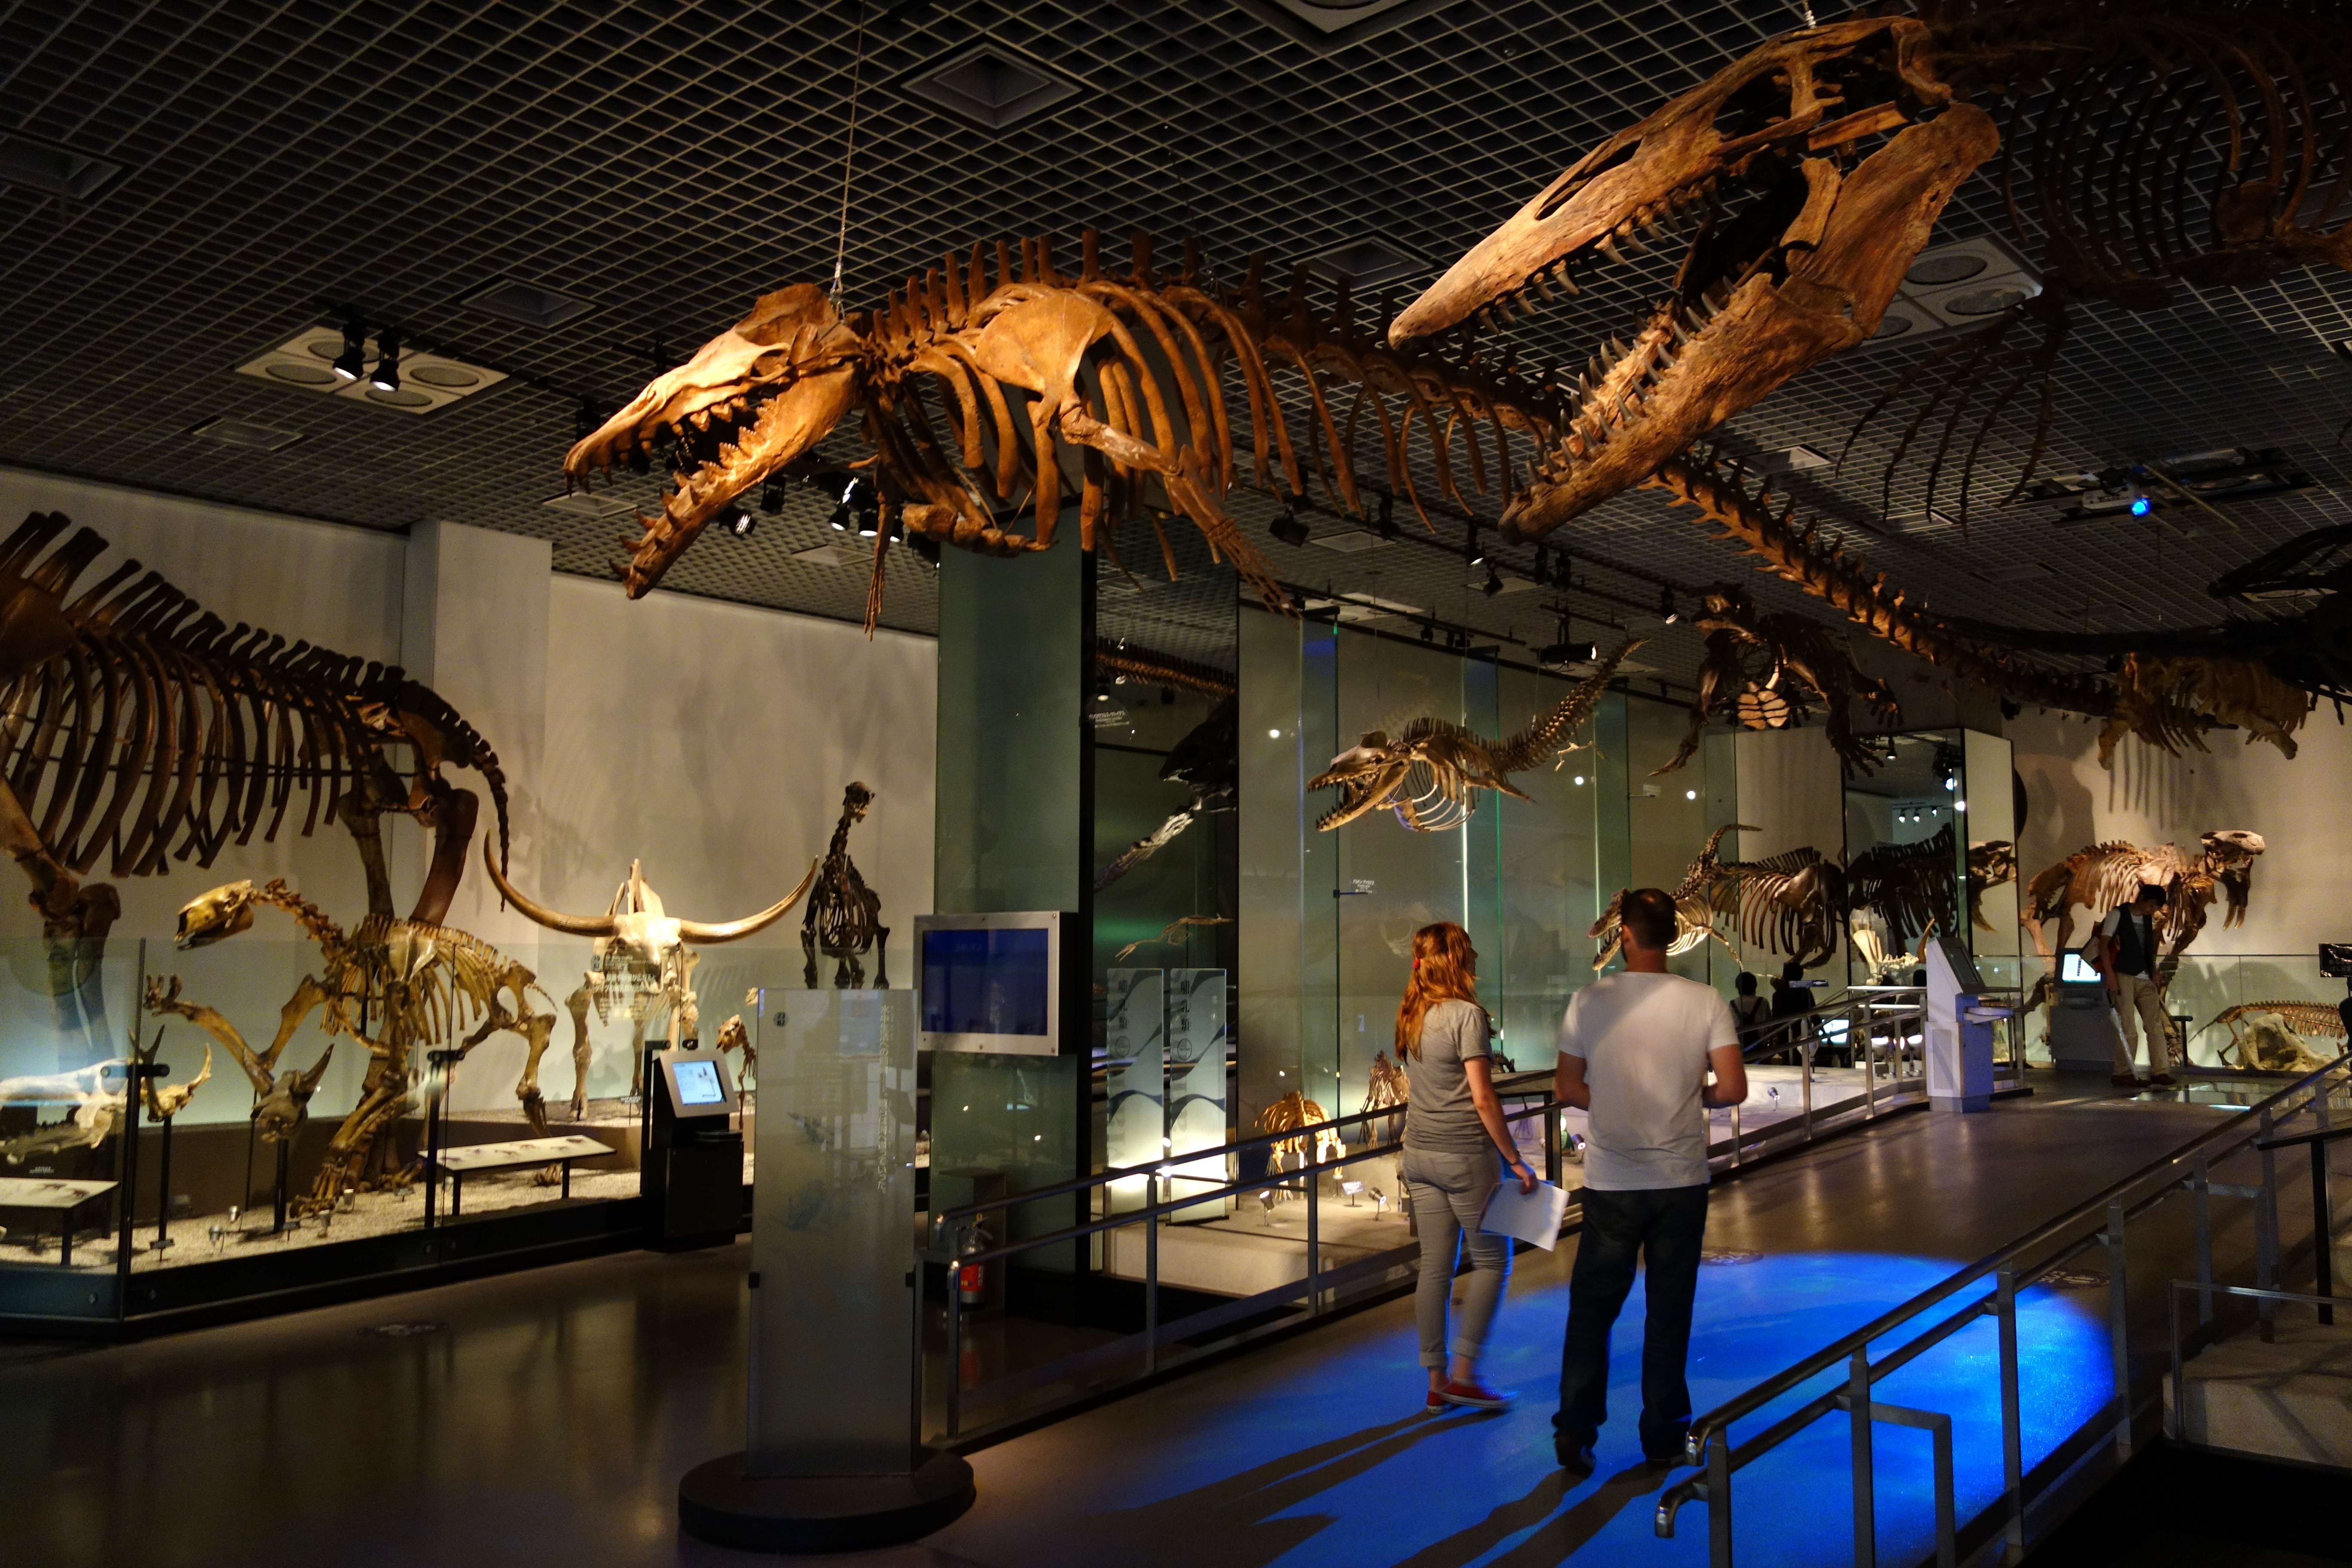 Fossil_gallery_-_National_Museum_of_Nature_and_Science%2C_Tokyo_-_DSC07775.JPG